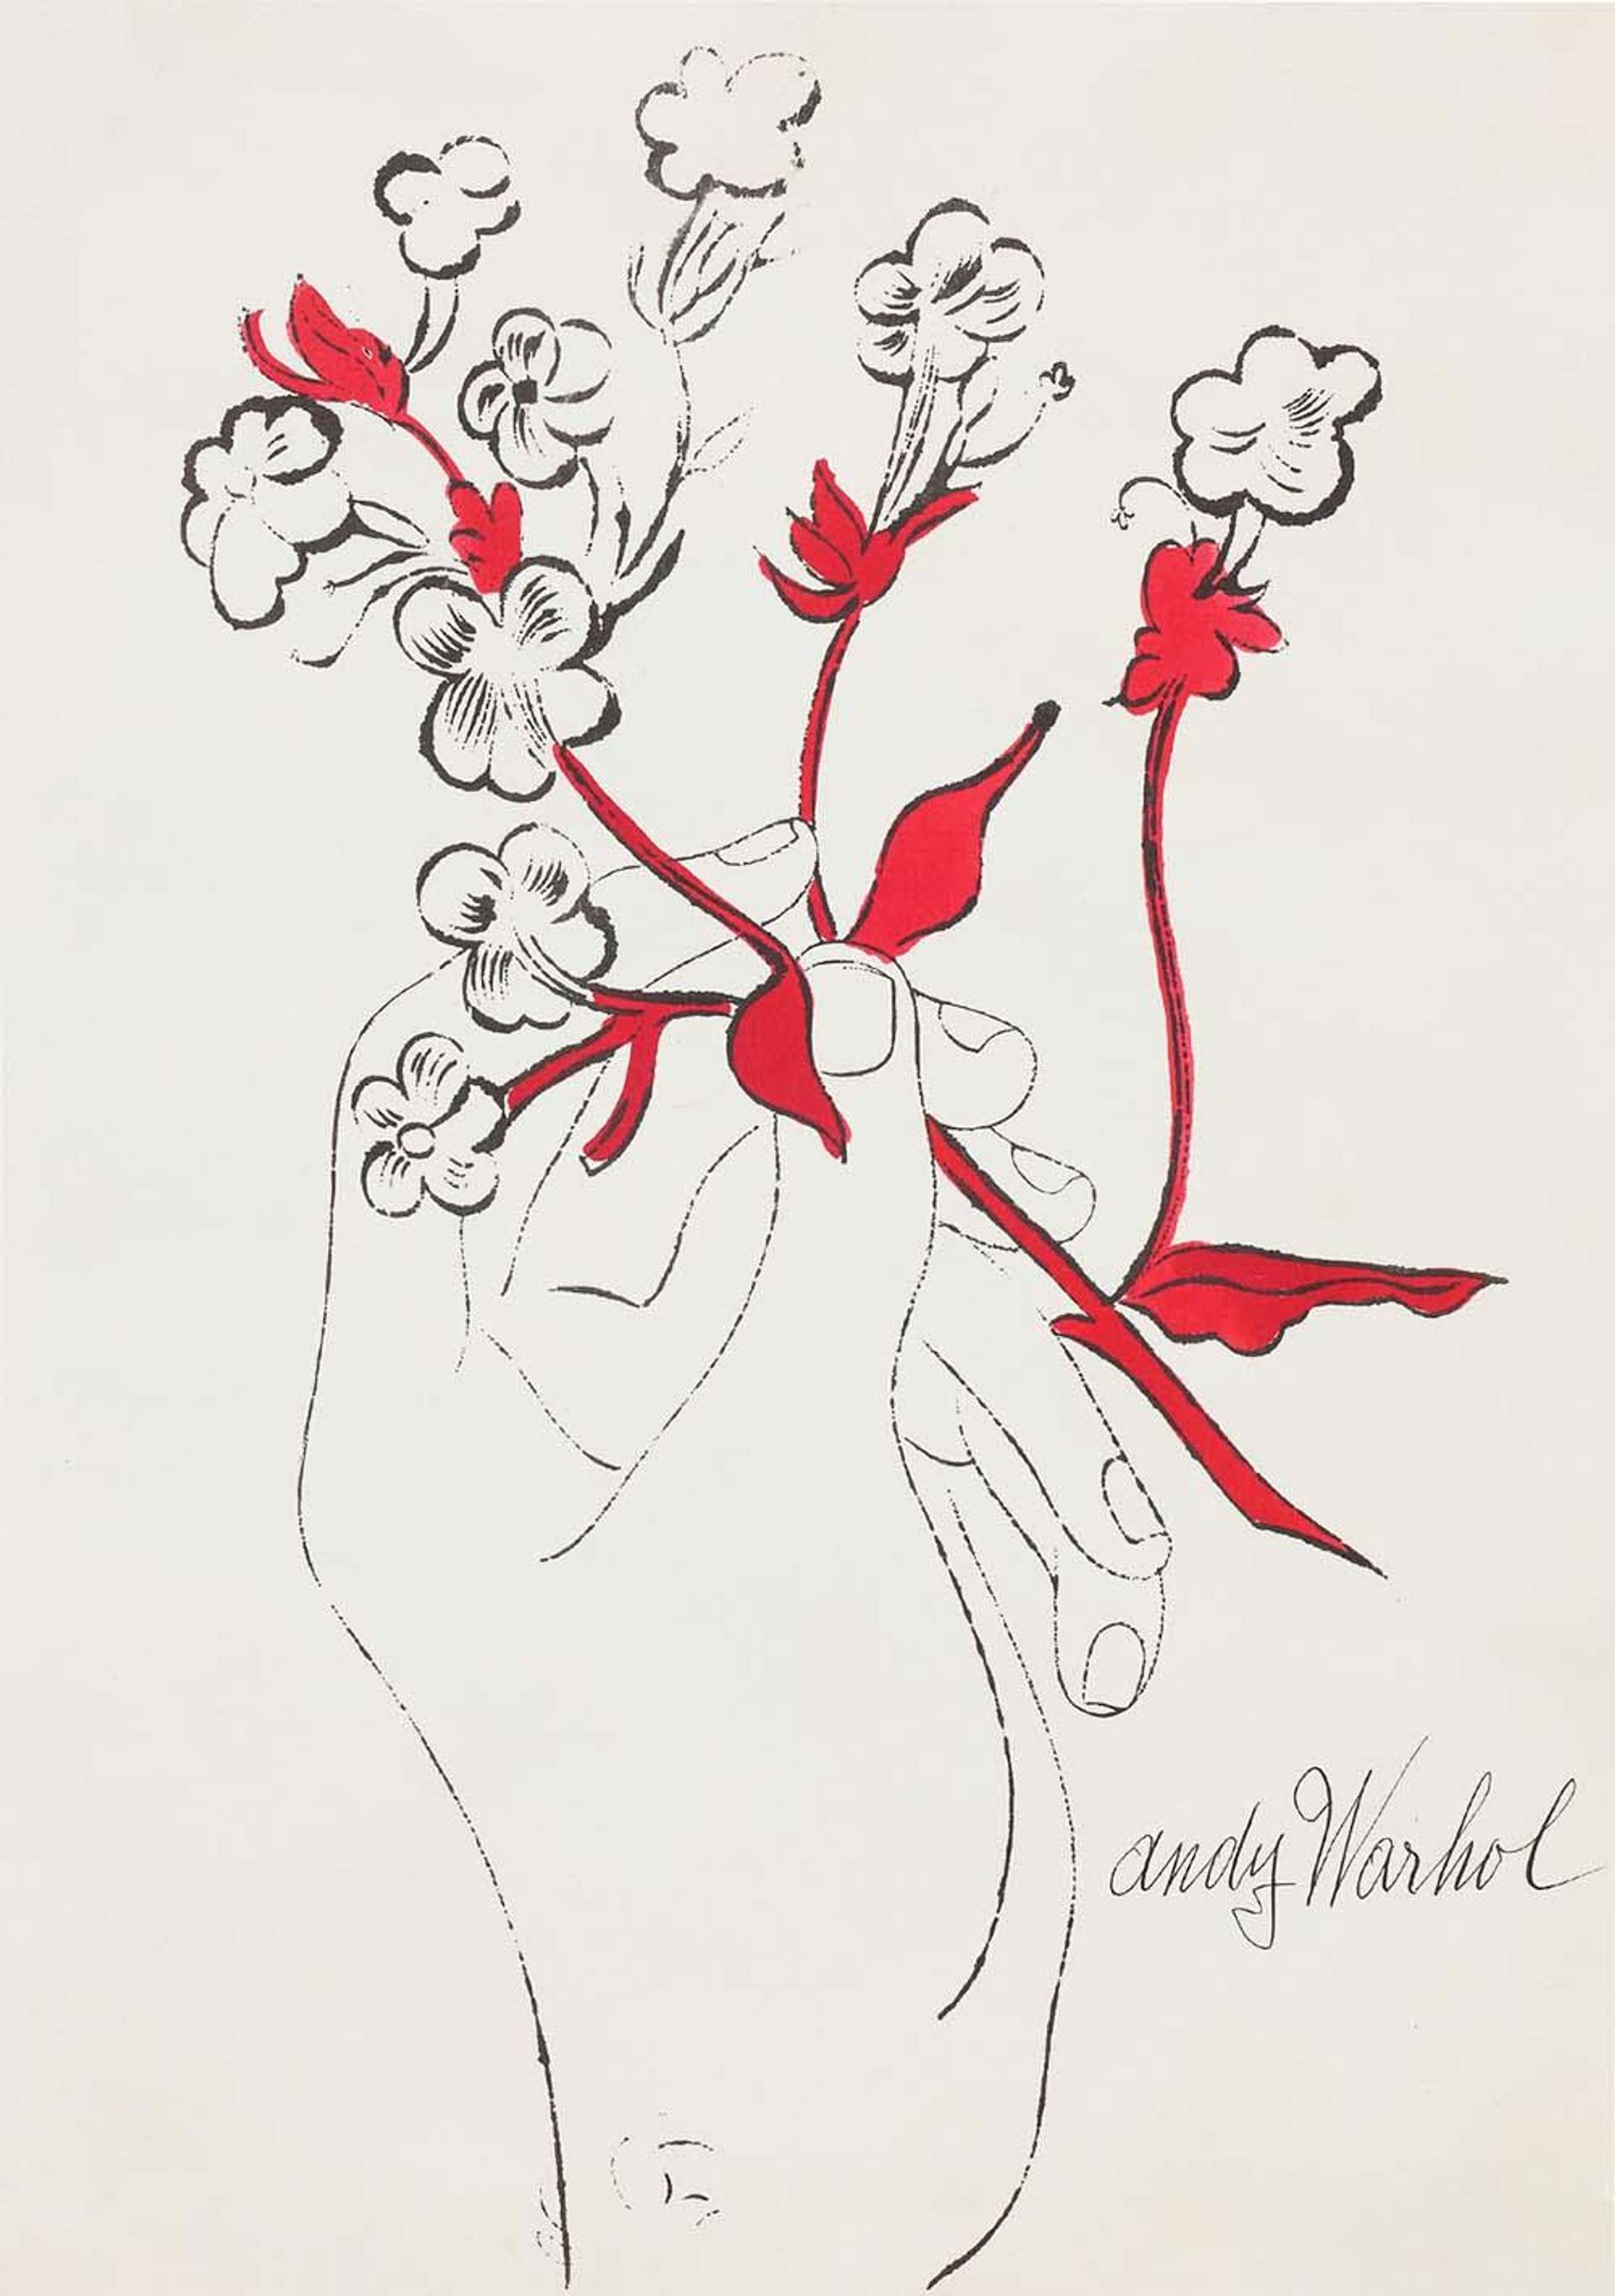 A Gold Book, Hand And Flowers (F. & S. IV.114) by Andy Warhol